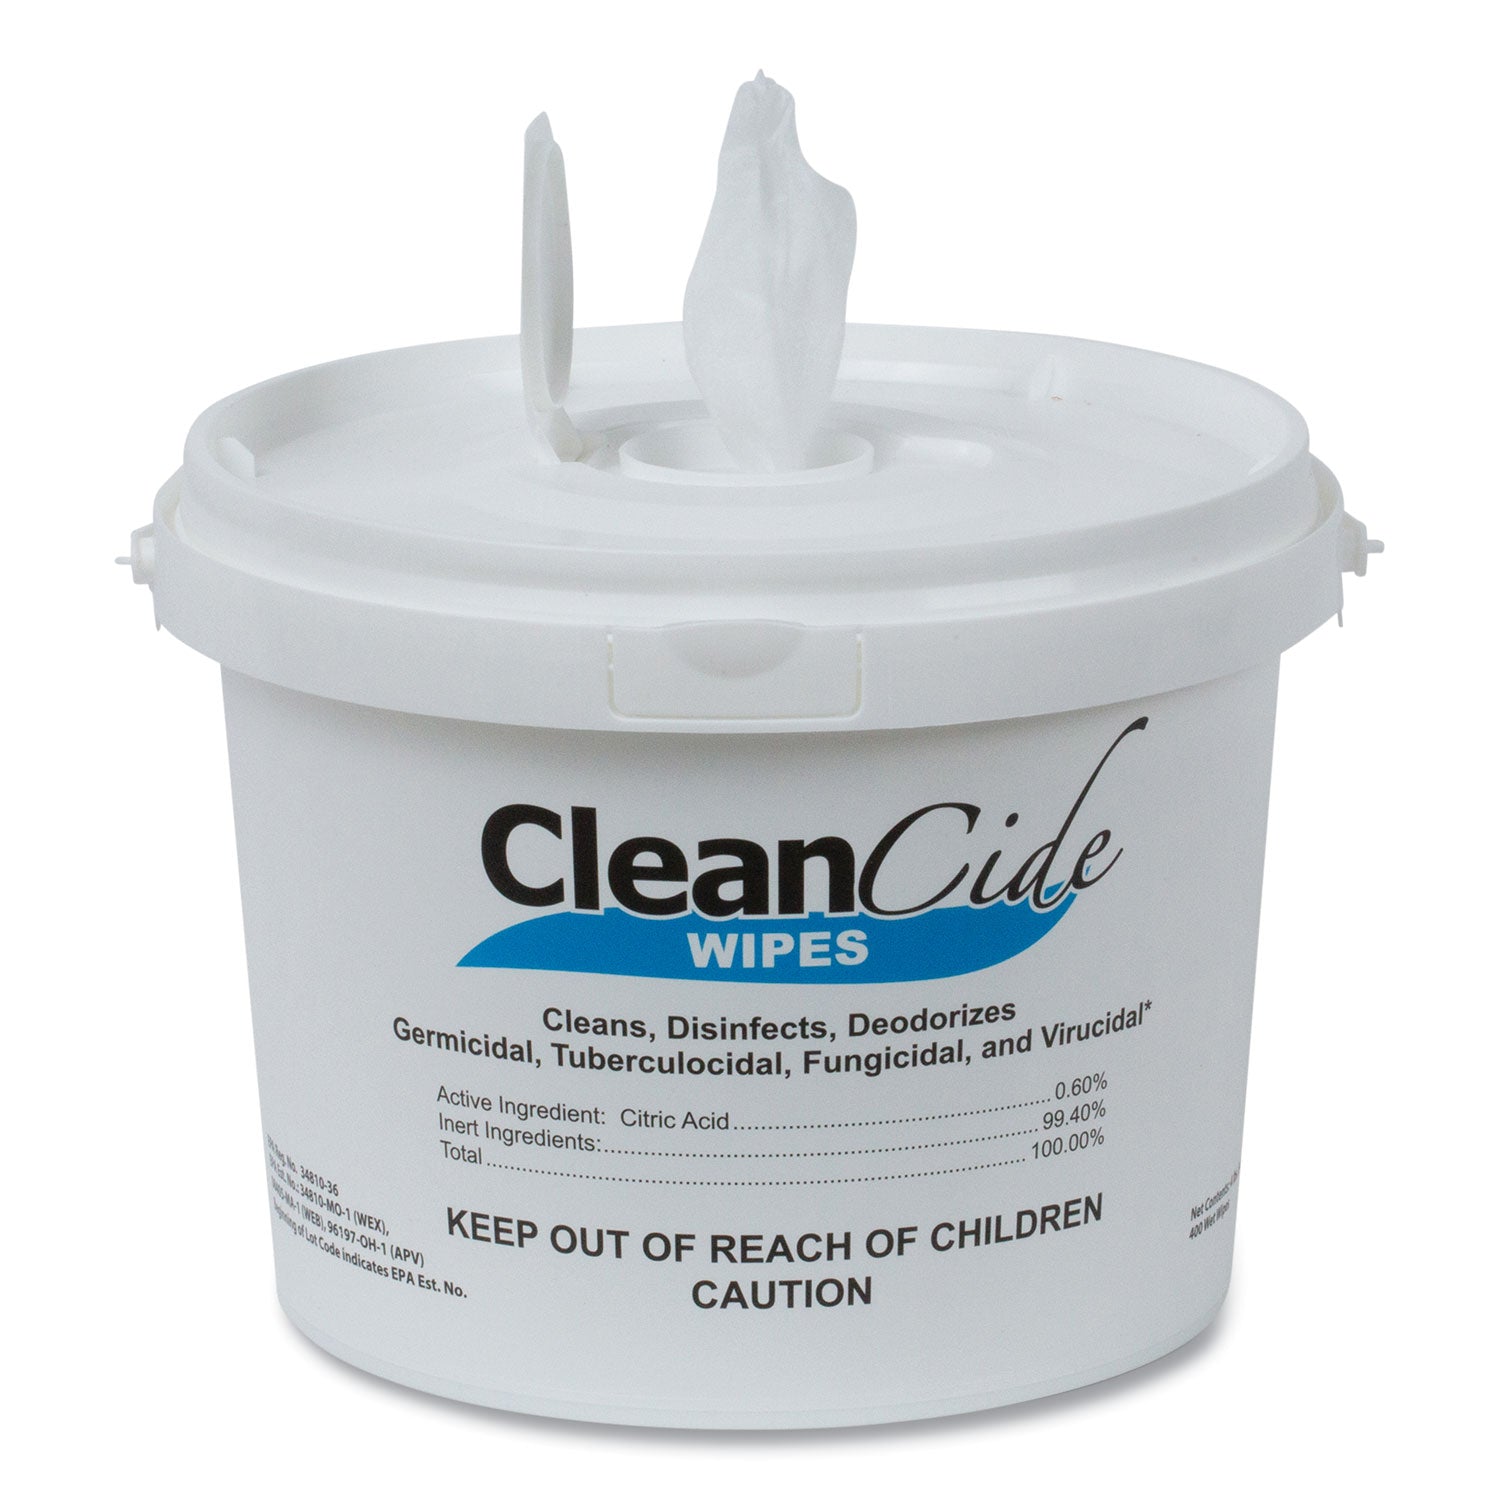 cleancide-disinfecting-wipes-1-ply-8-x-55-fresh-scent-white-400-tub_wxf3130b400dea - 1